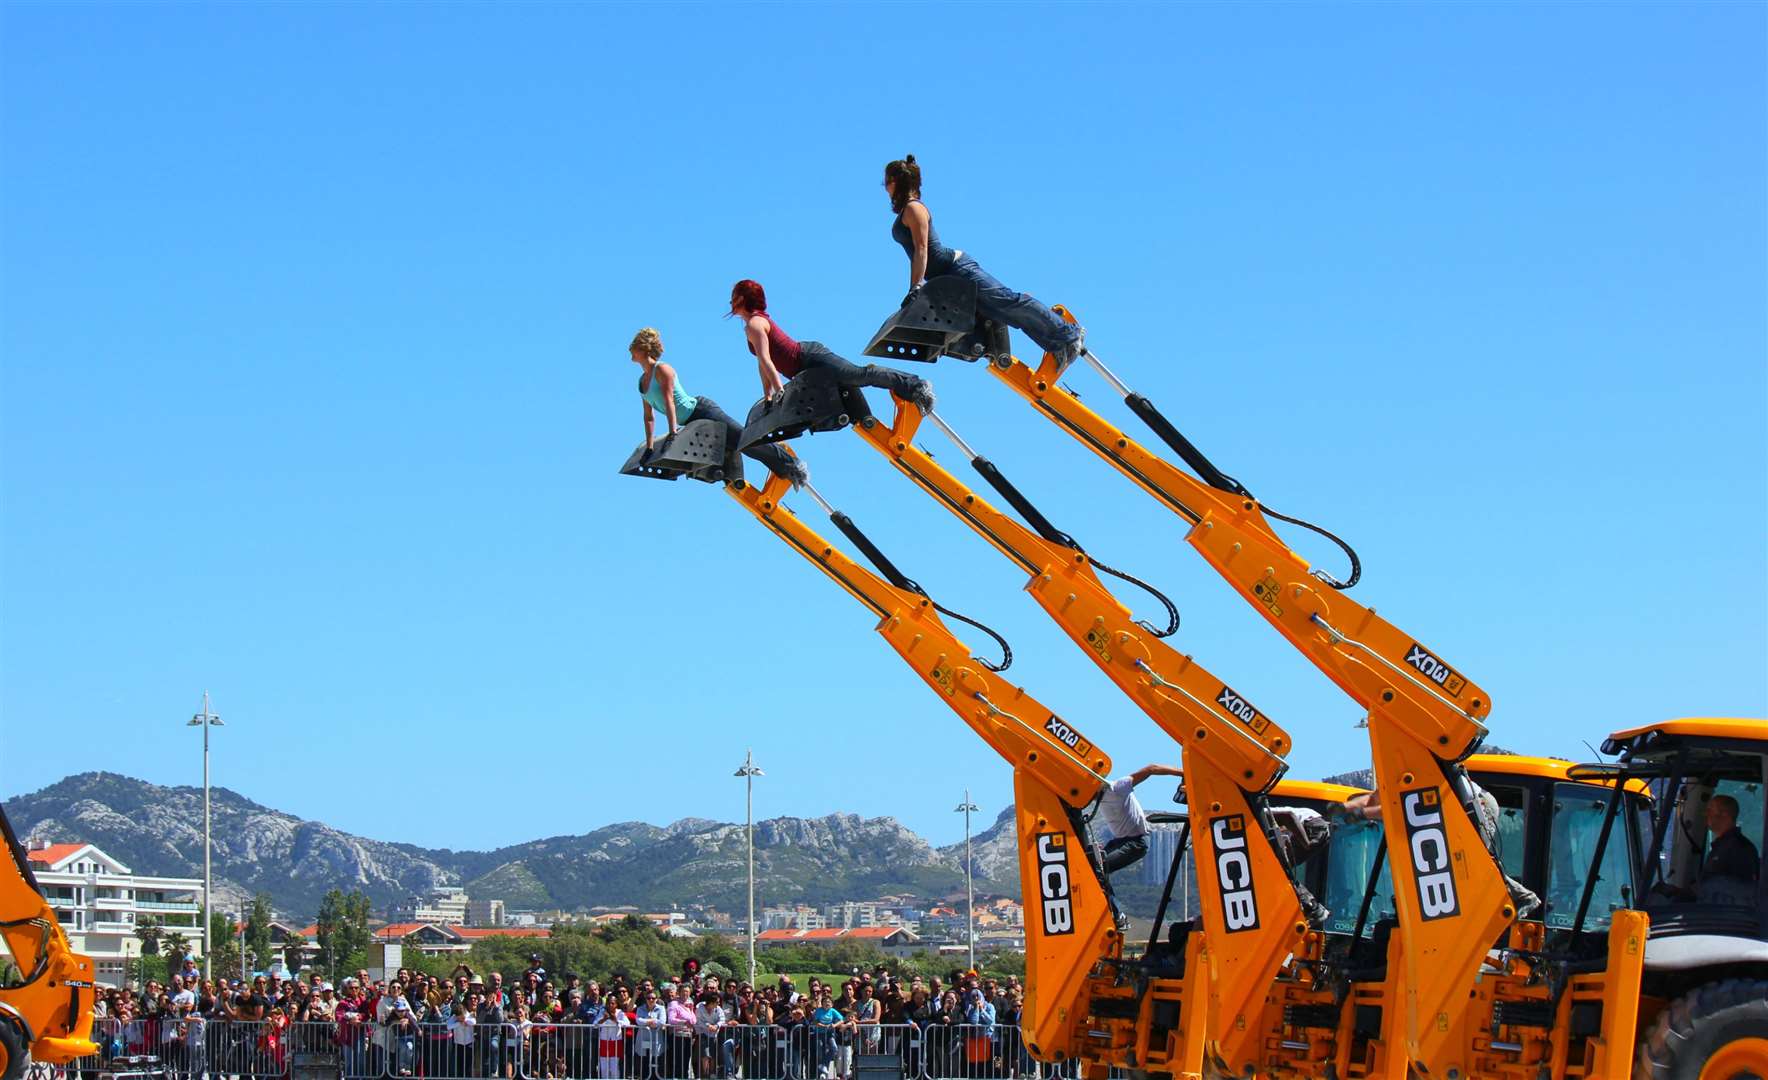 Diggers and dancers at the bOing! International Family Festival in 2015